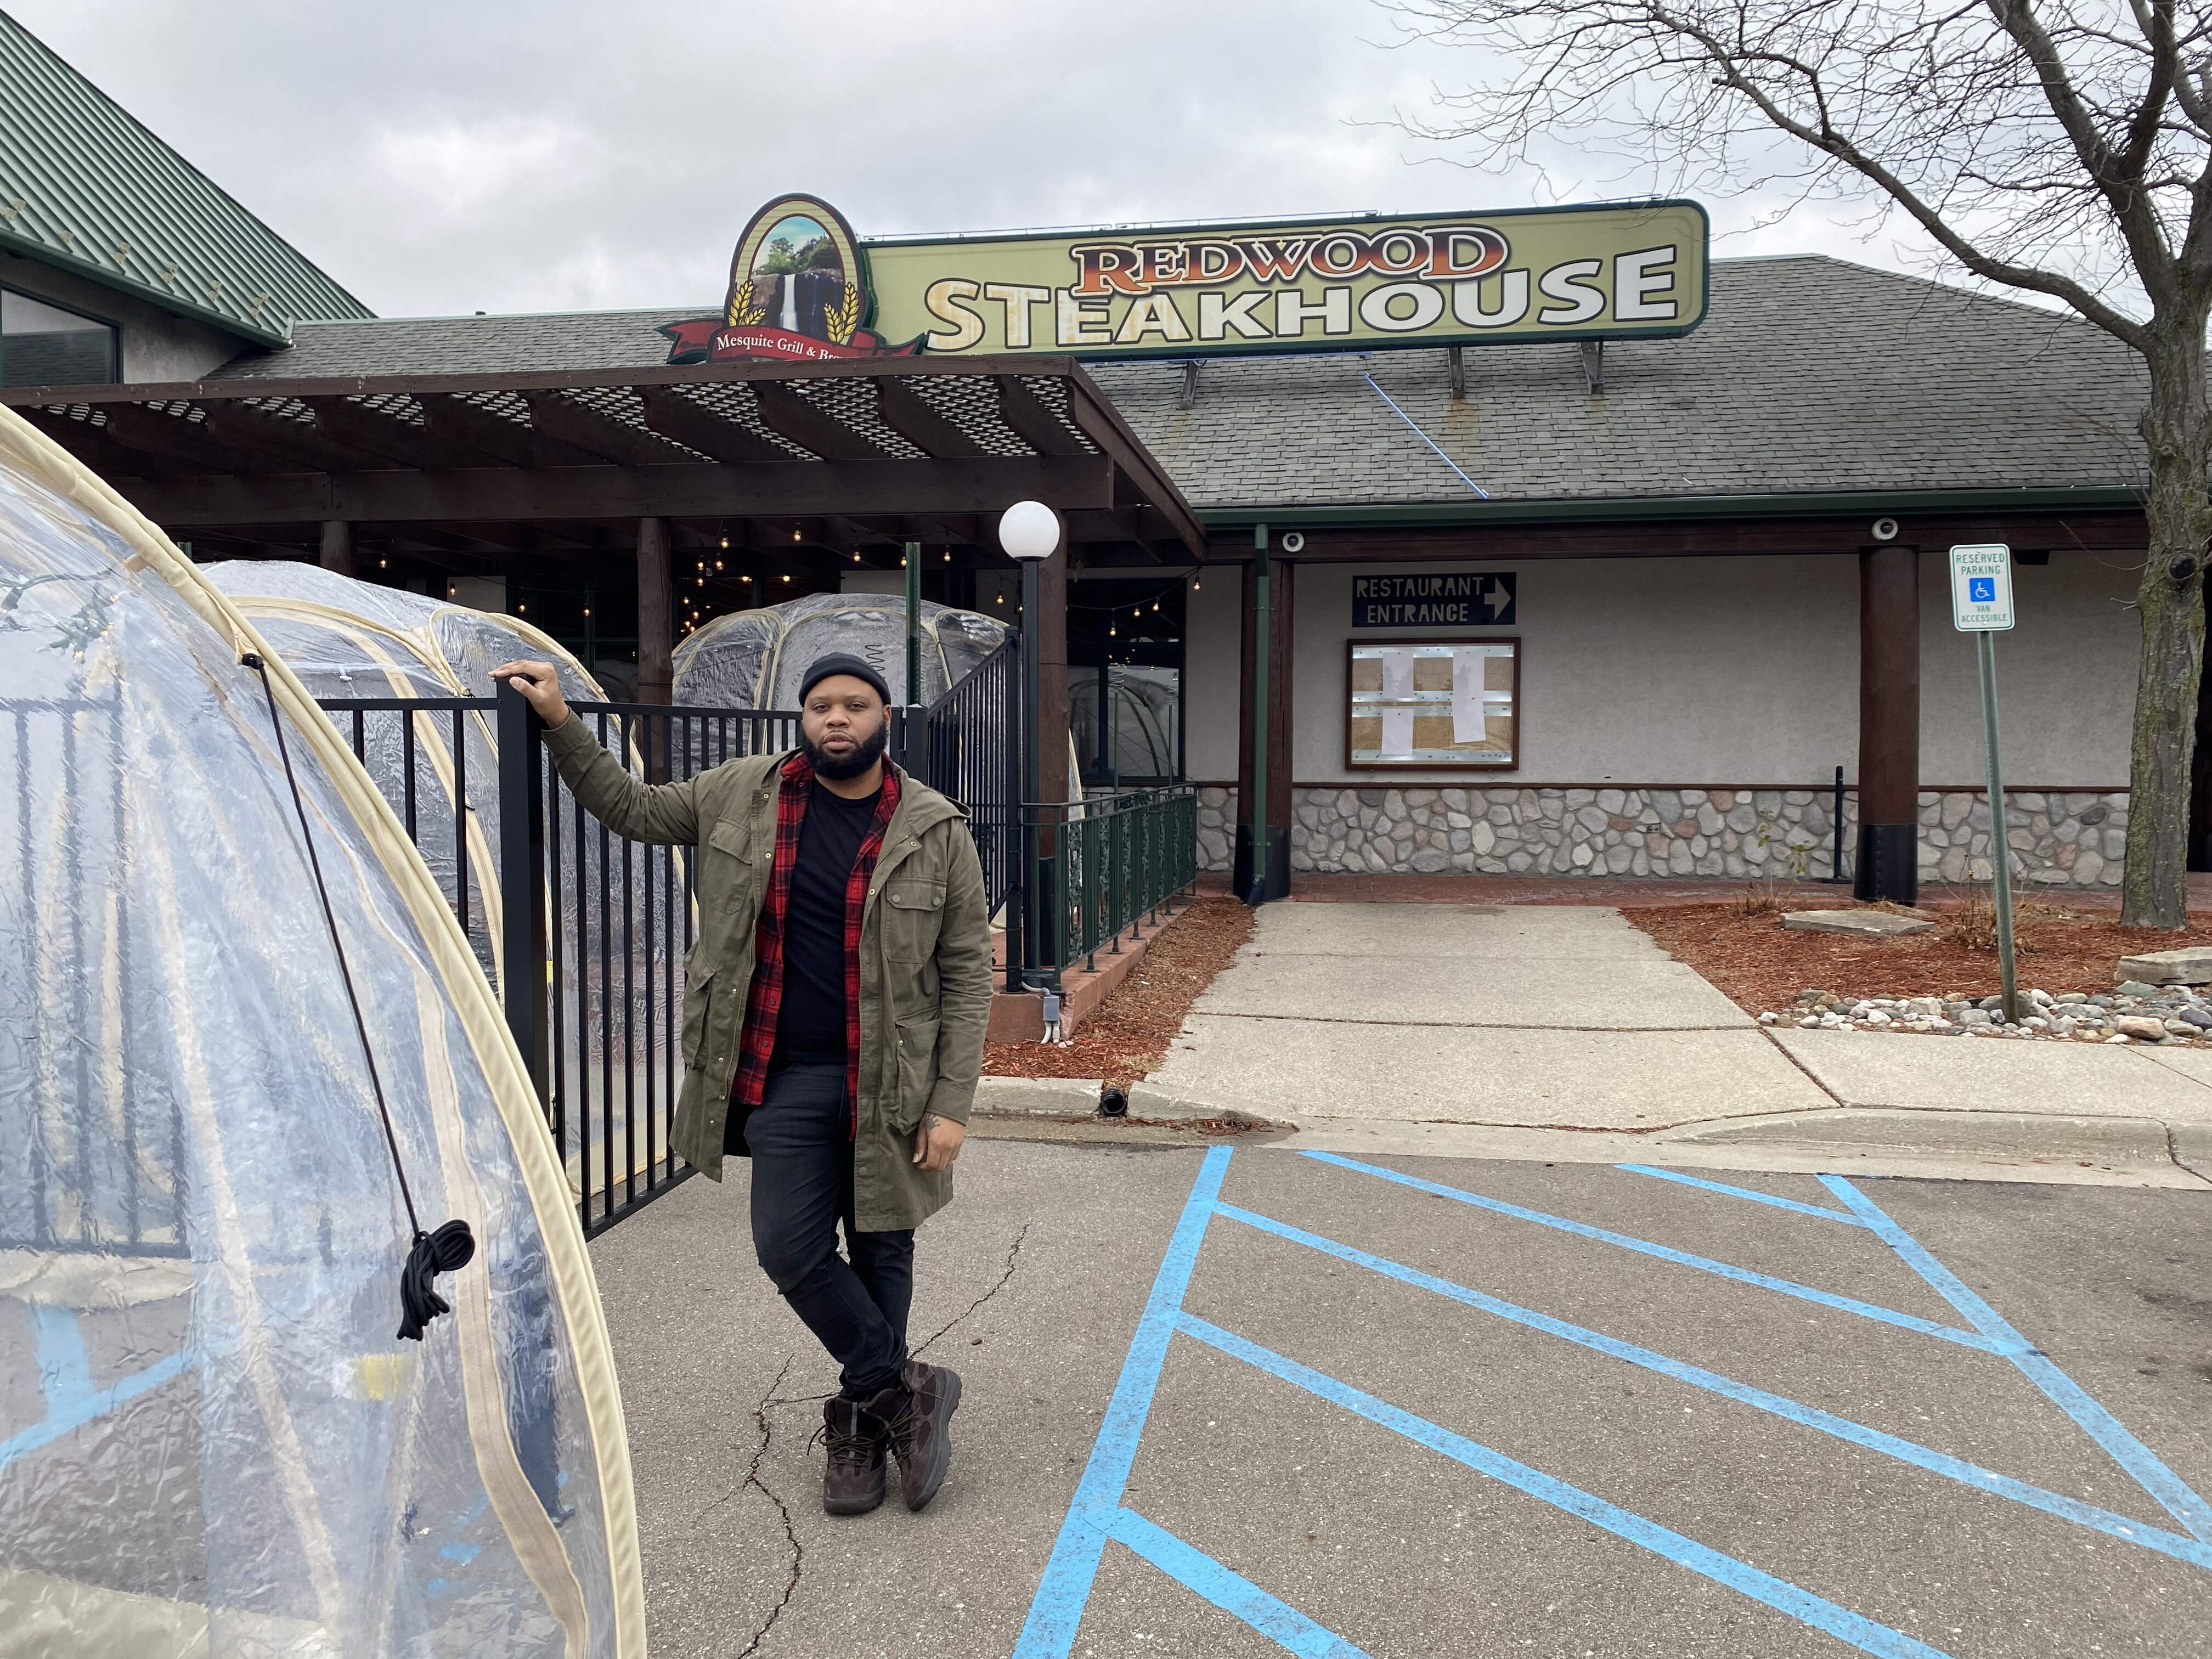 Brandon Corder has partnered with Redwood Steakhouse and Brewery to keep his popular Beats x Brunch event going during the pandemic. 